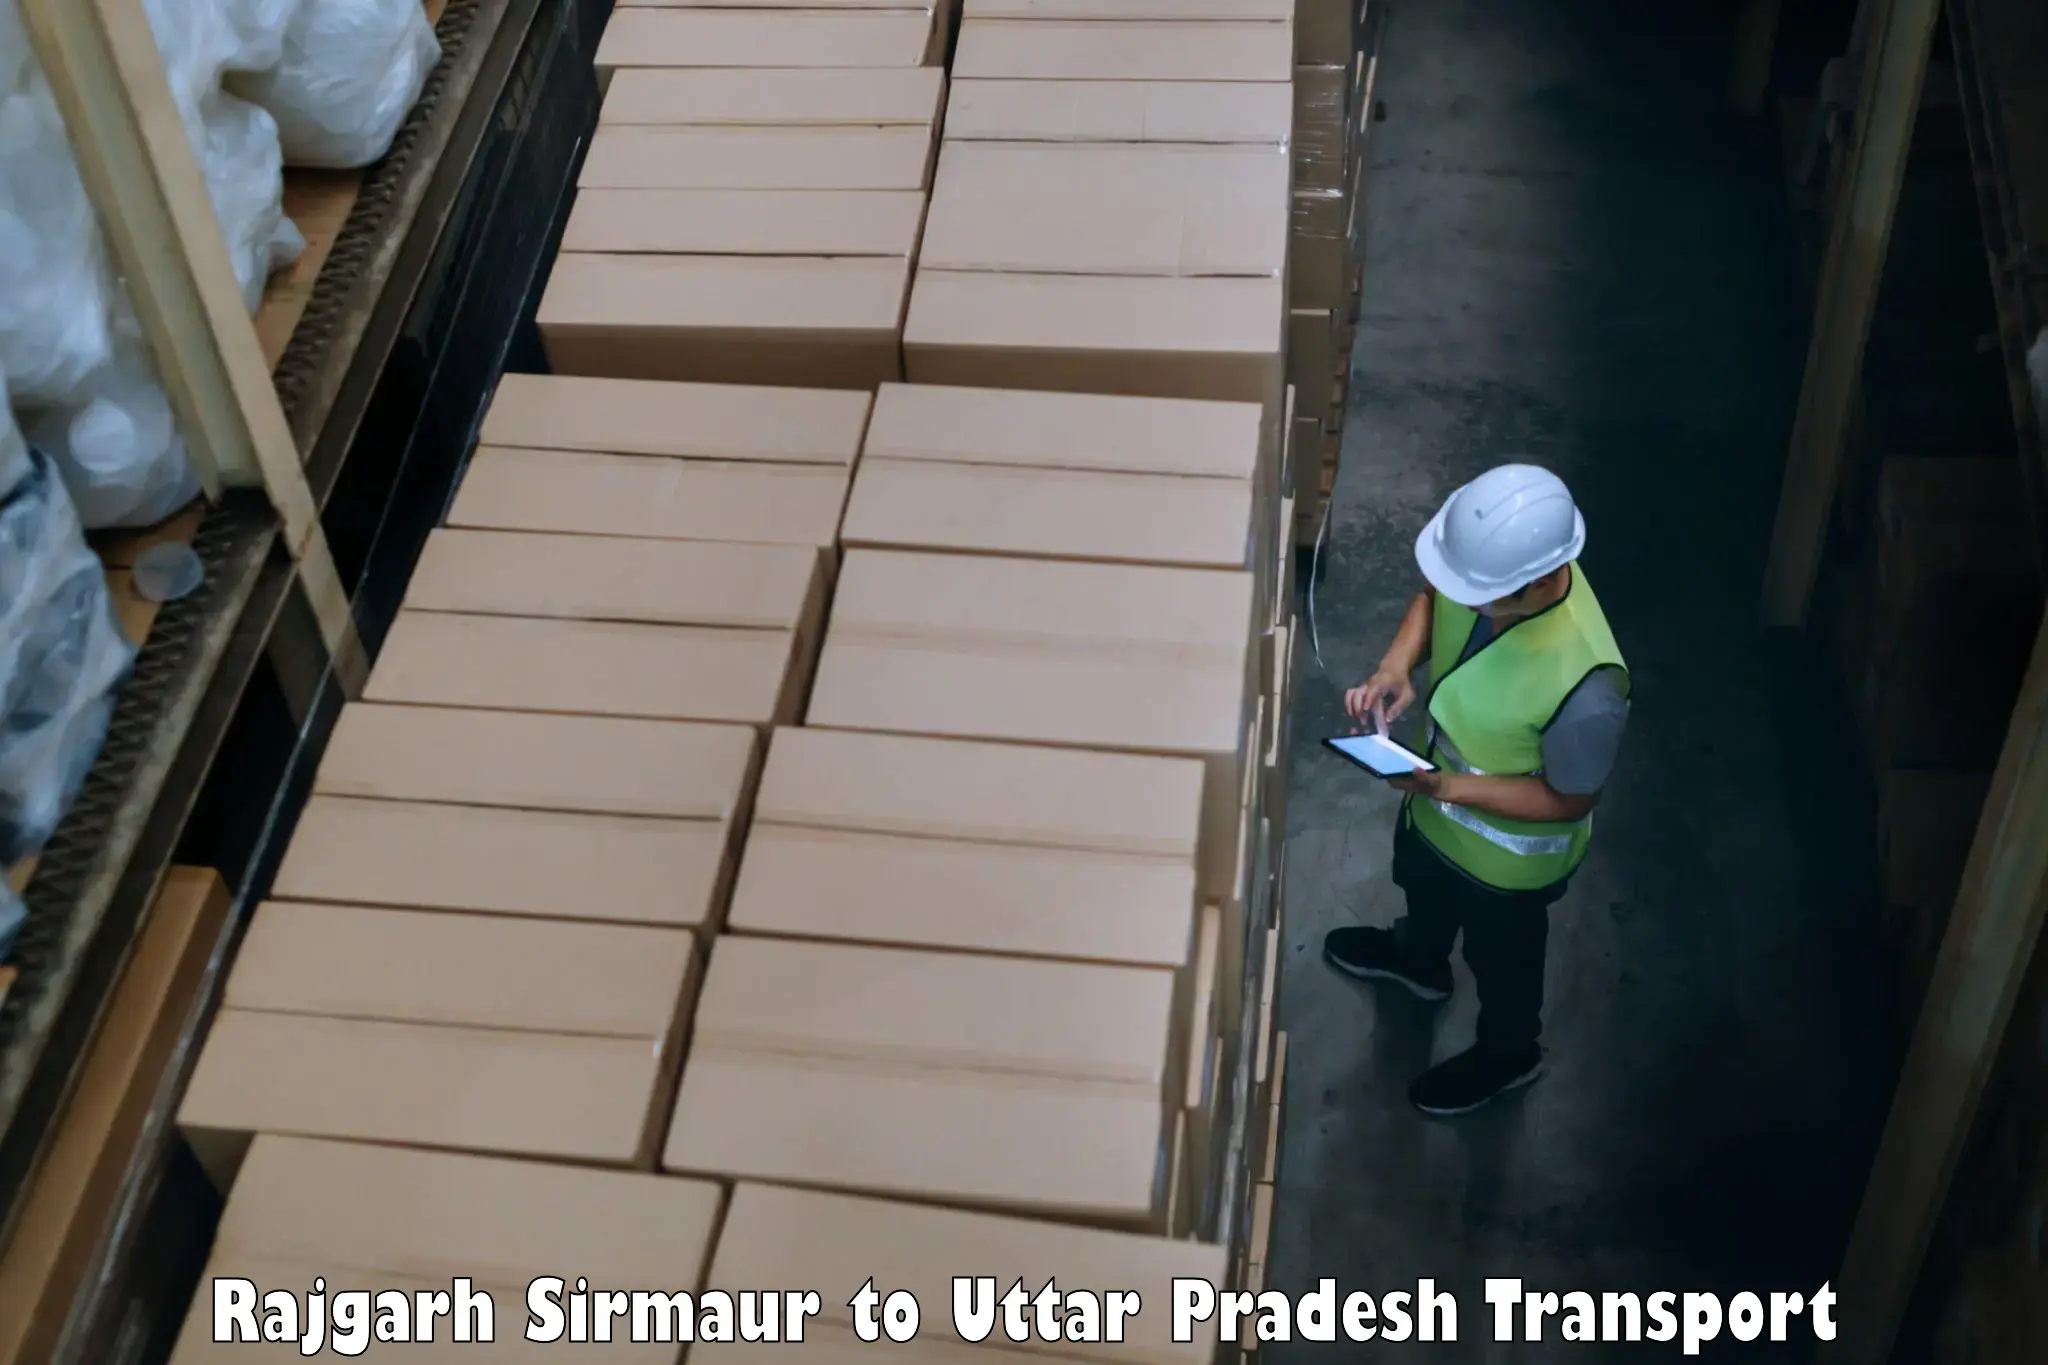 Daily parcel service transport in Rajgarh Sirmaur to IIT Kanpur